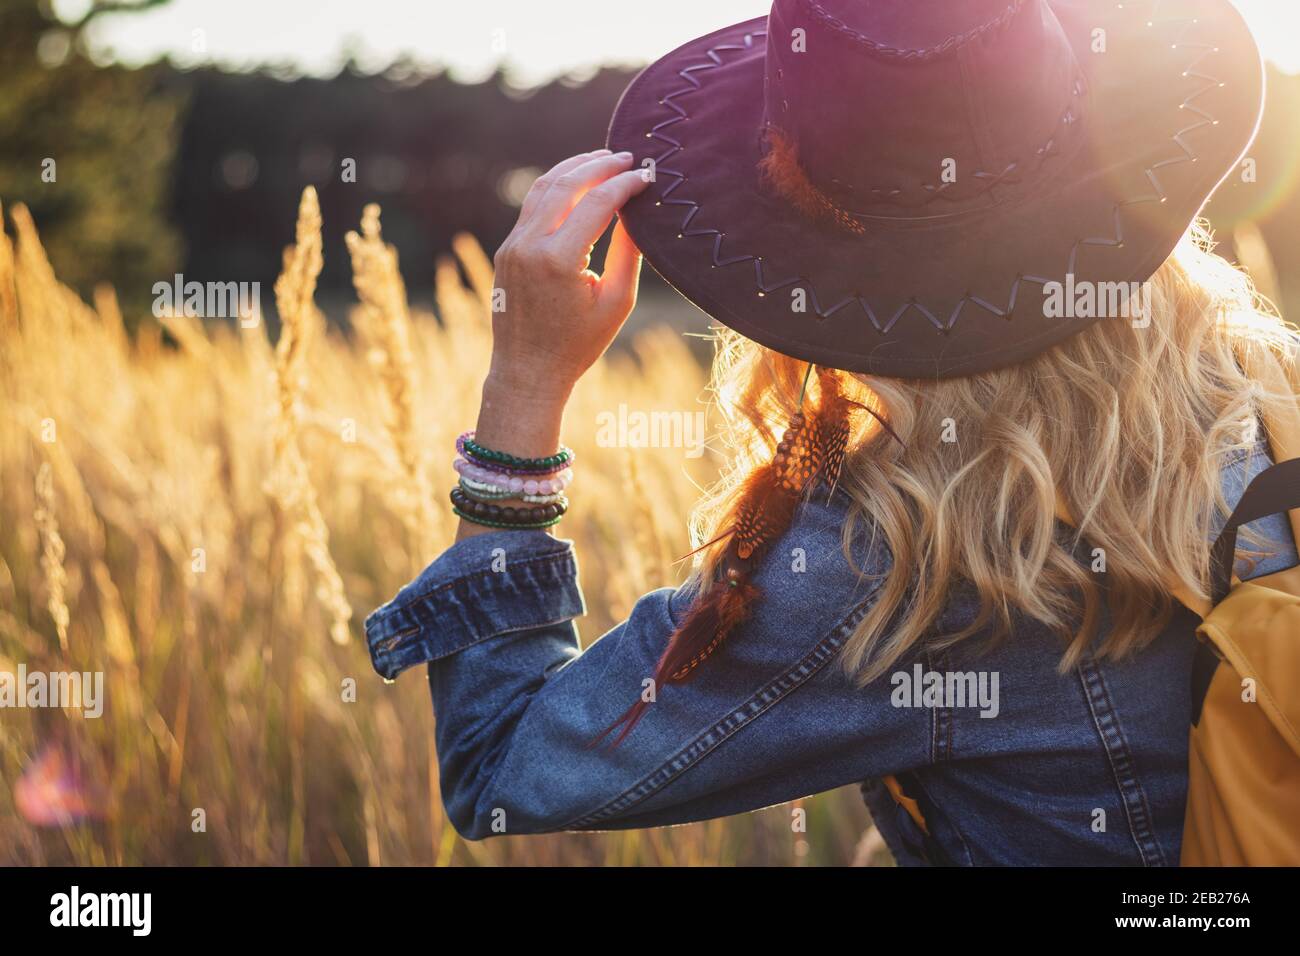 Blond hair woman with hat and denim jacket enjoying sunset outdoors Stock Photo